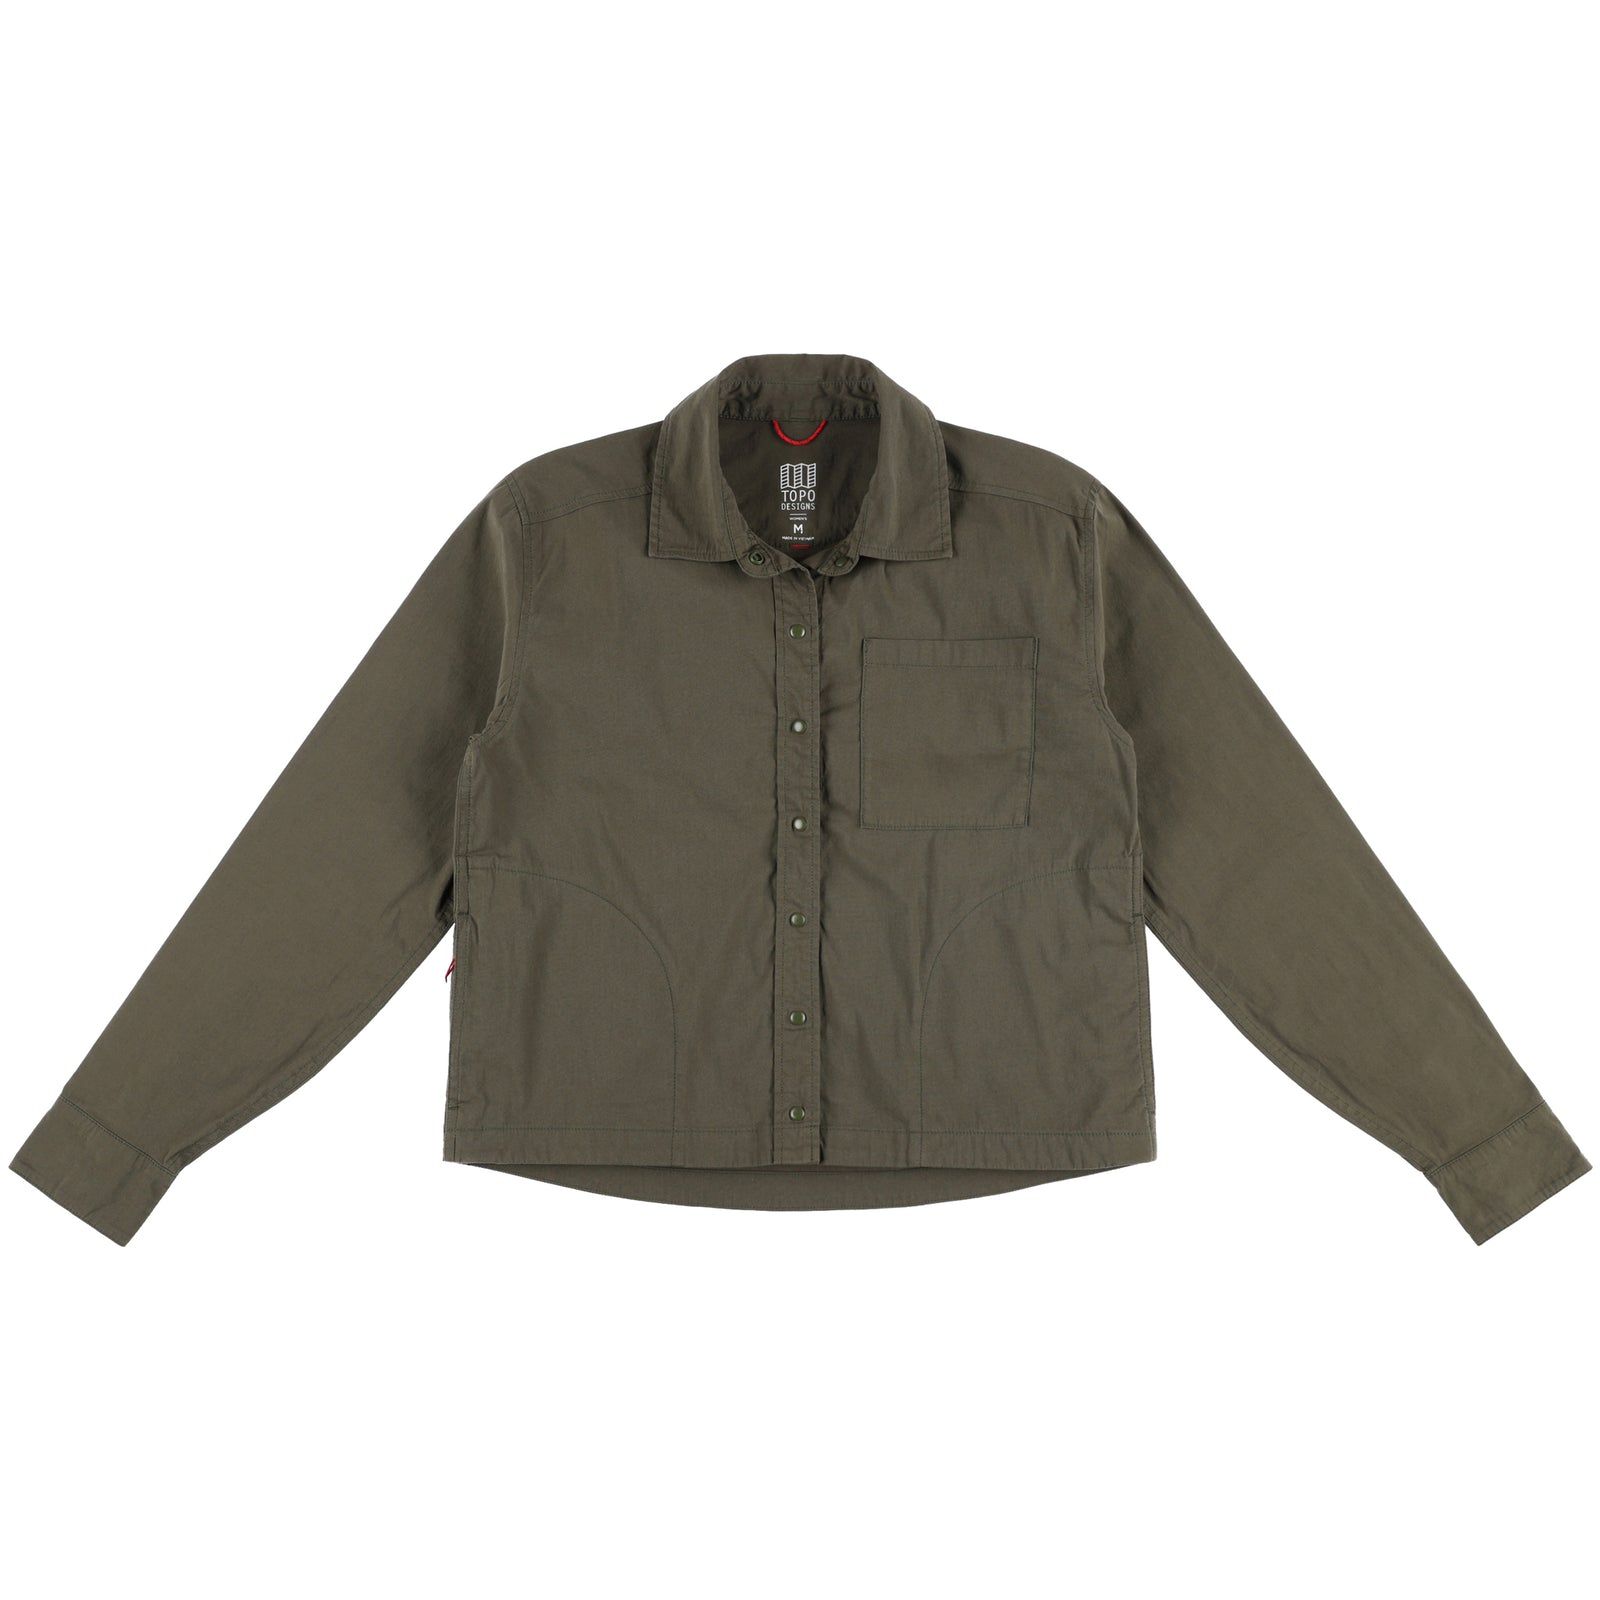 Topo Designs Women's Global long sleeve lightweight snap travel shirt in "Olive" green.